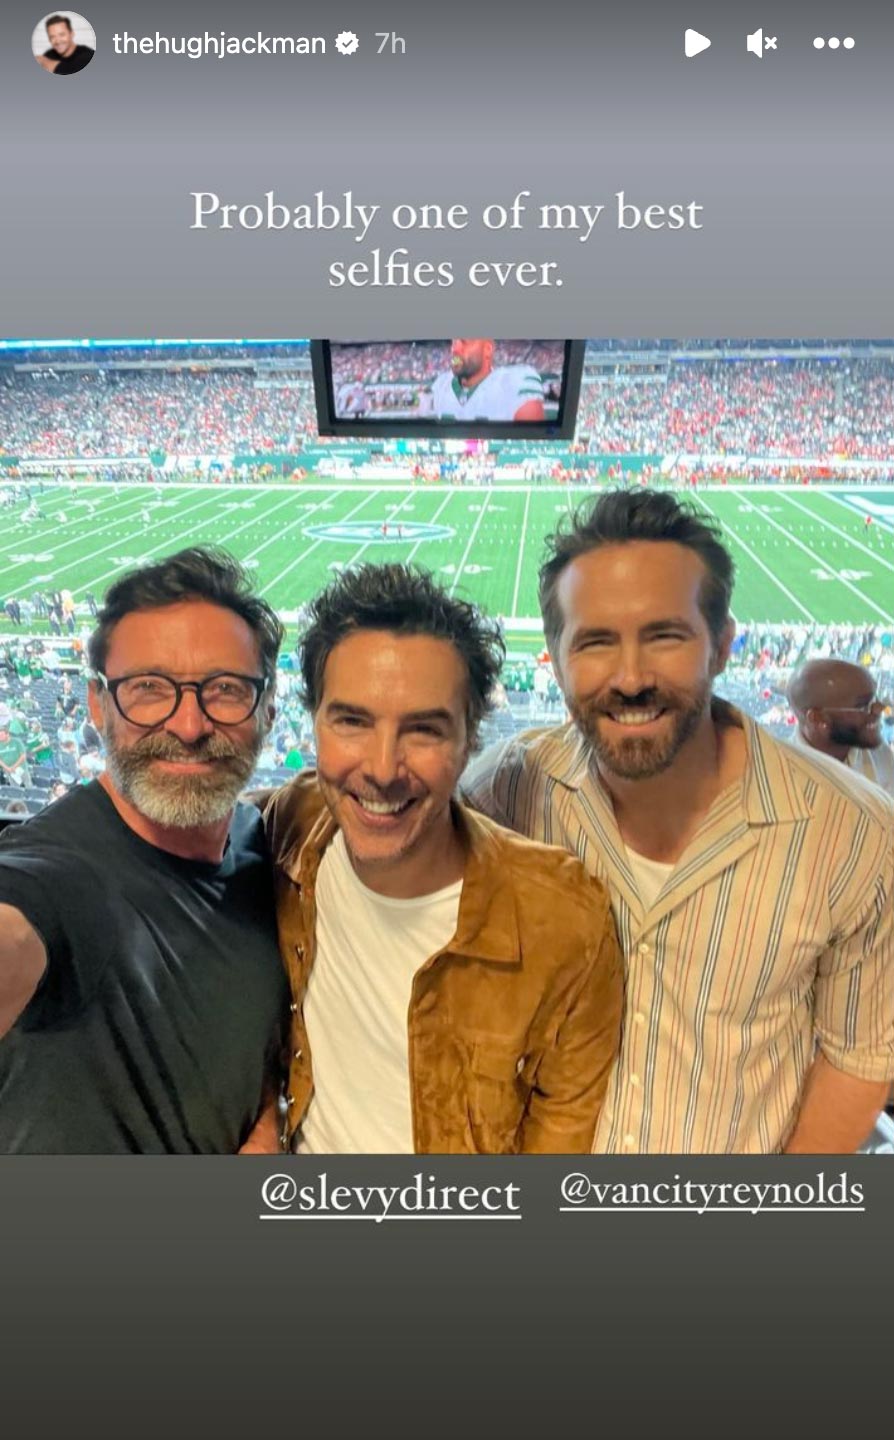 Hugh Jackman Proves He Had the Time of His Life at the Chiefs Games With Star-Studded Selfies